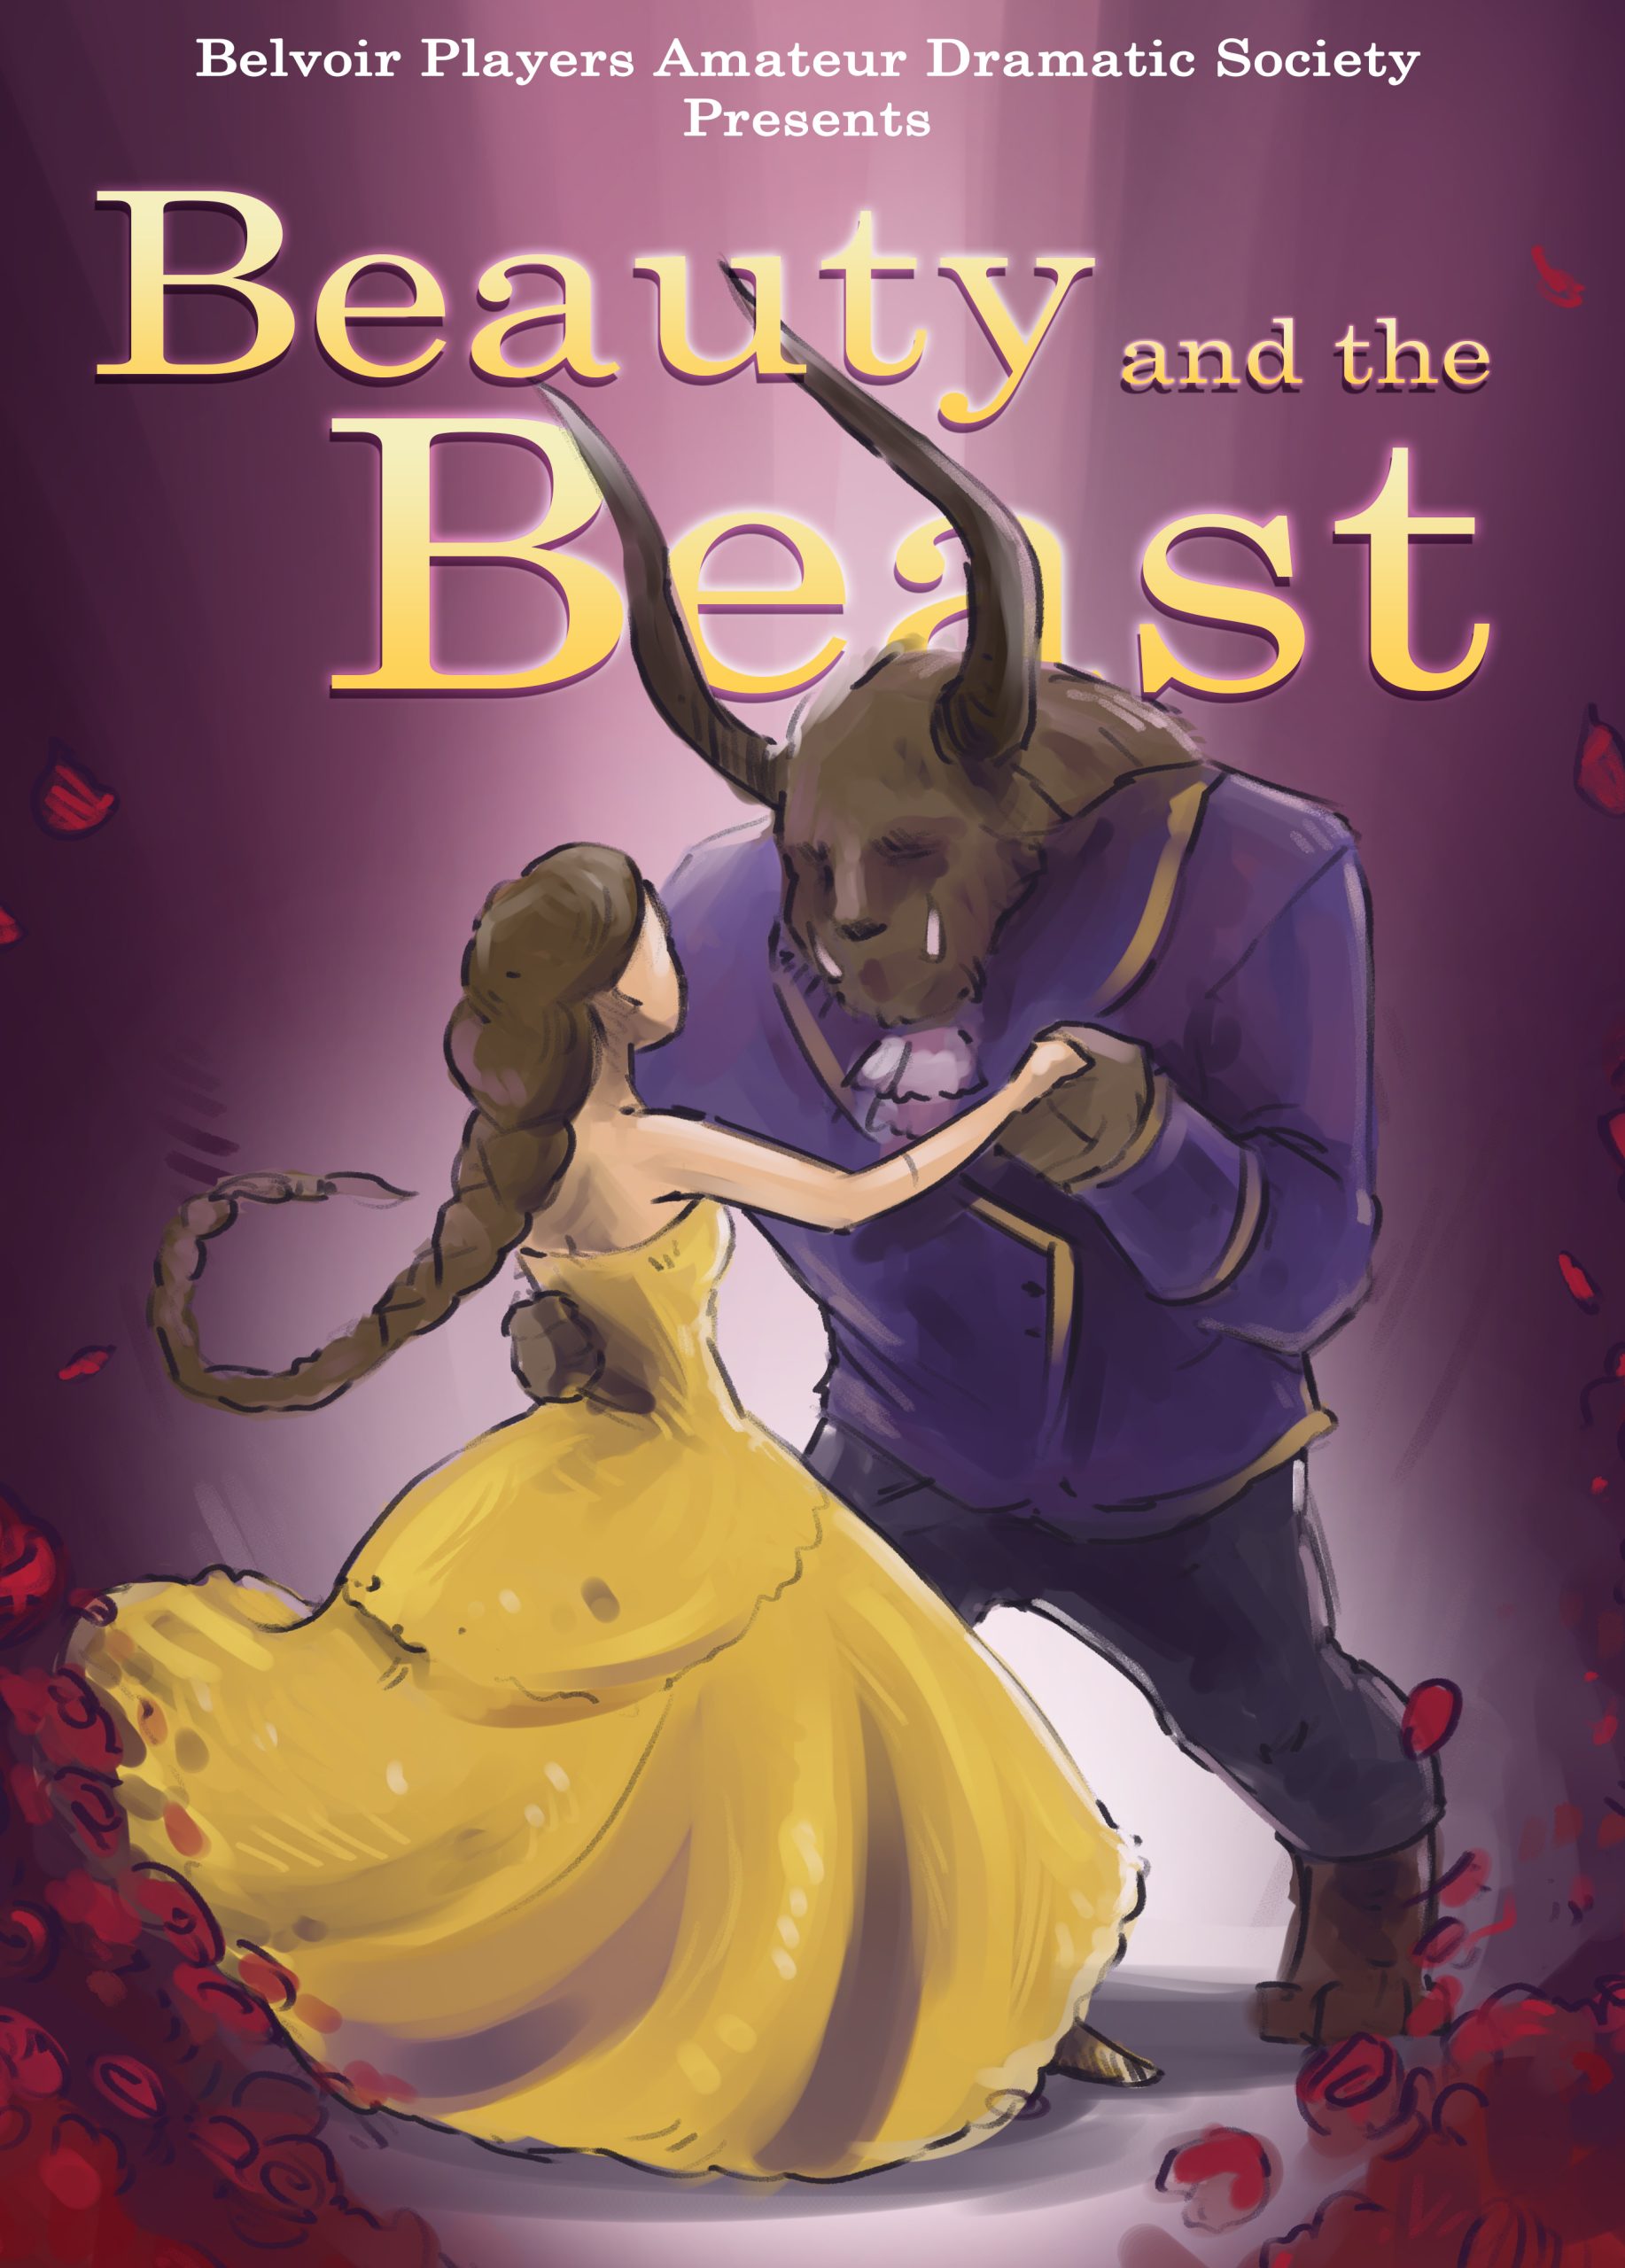 Belle and the Beast dancing with the title of the show